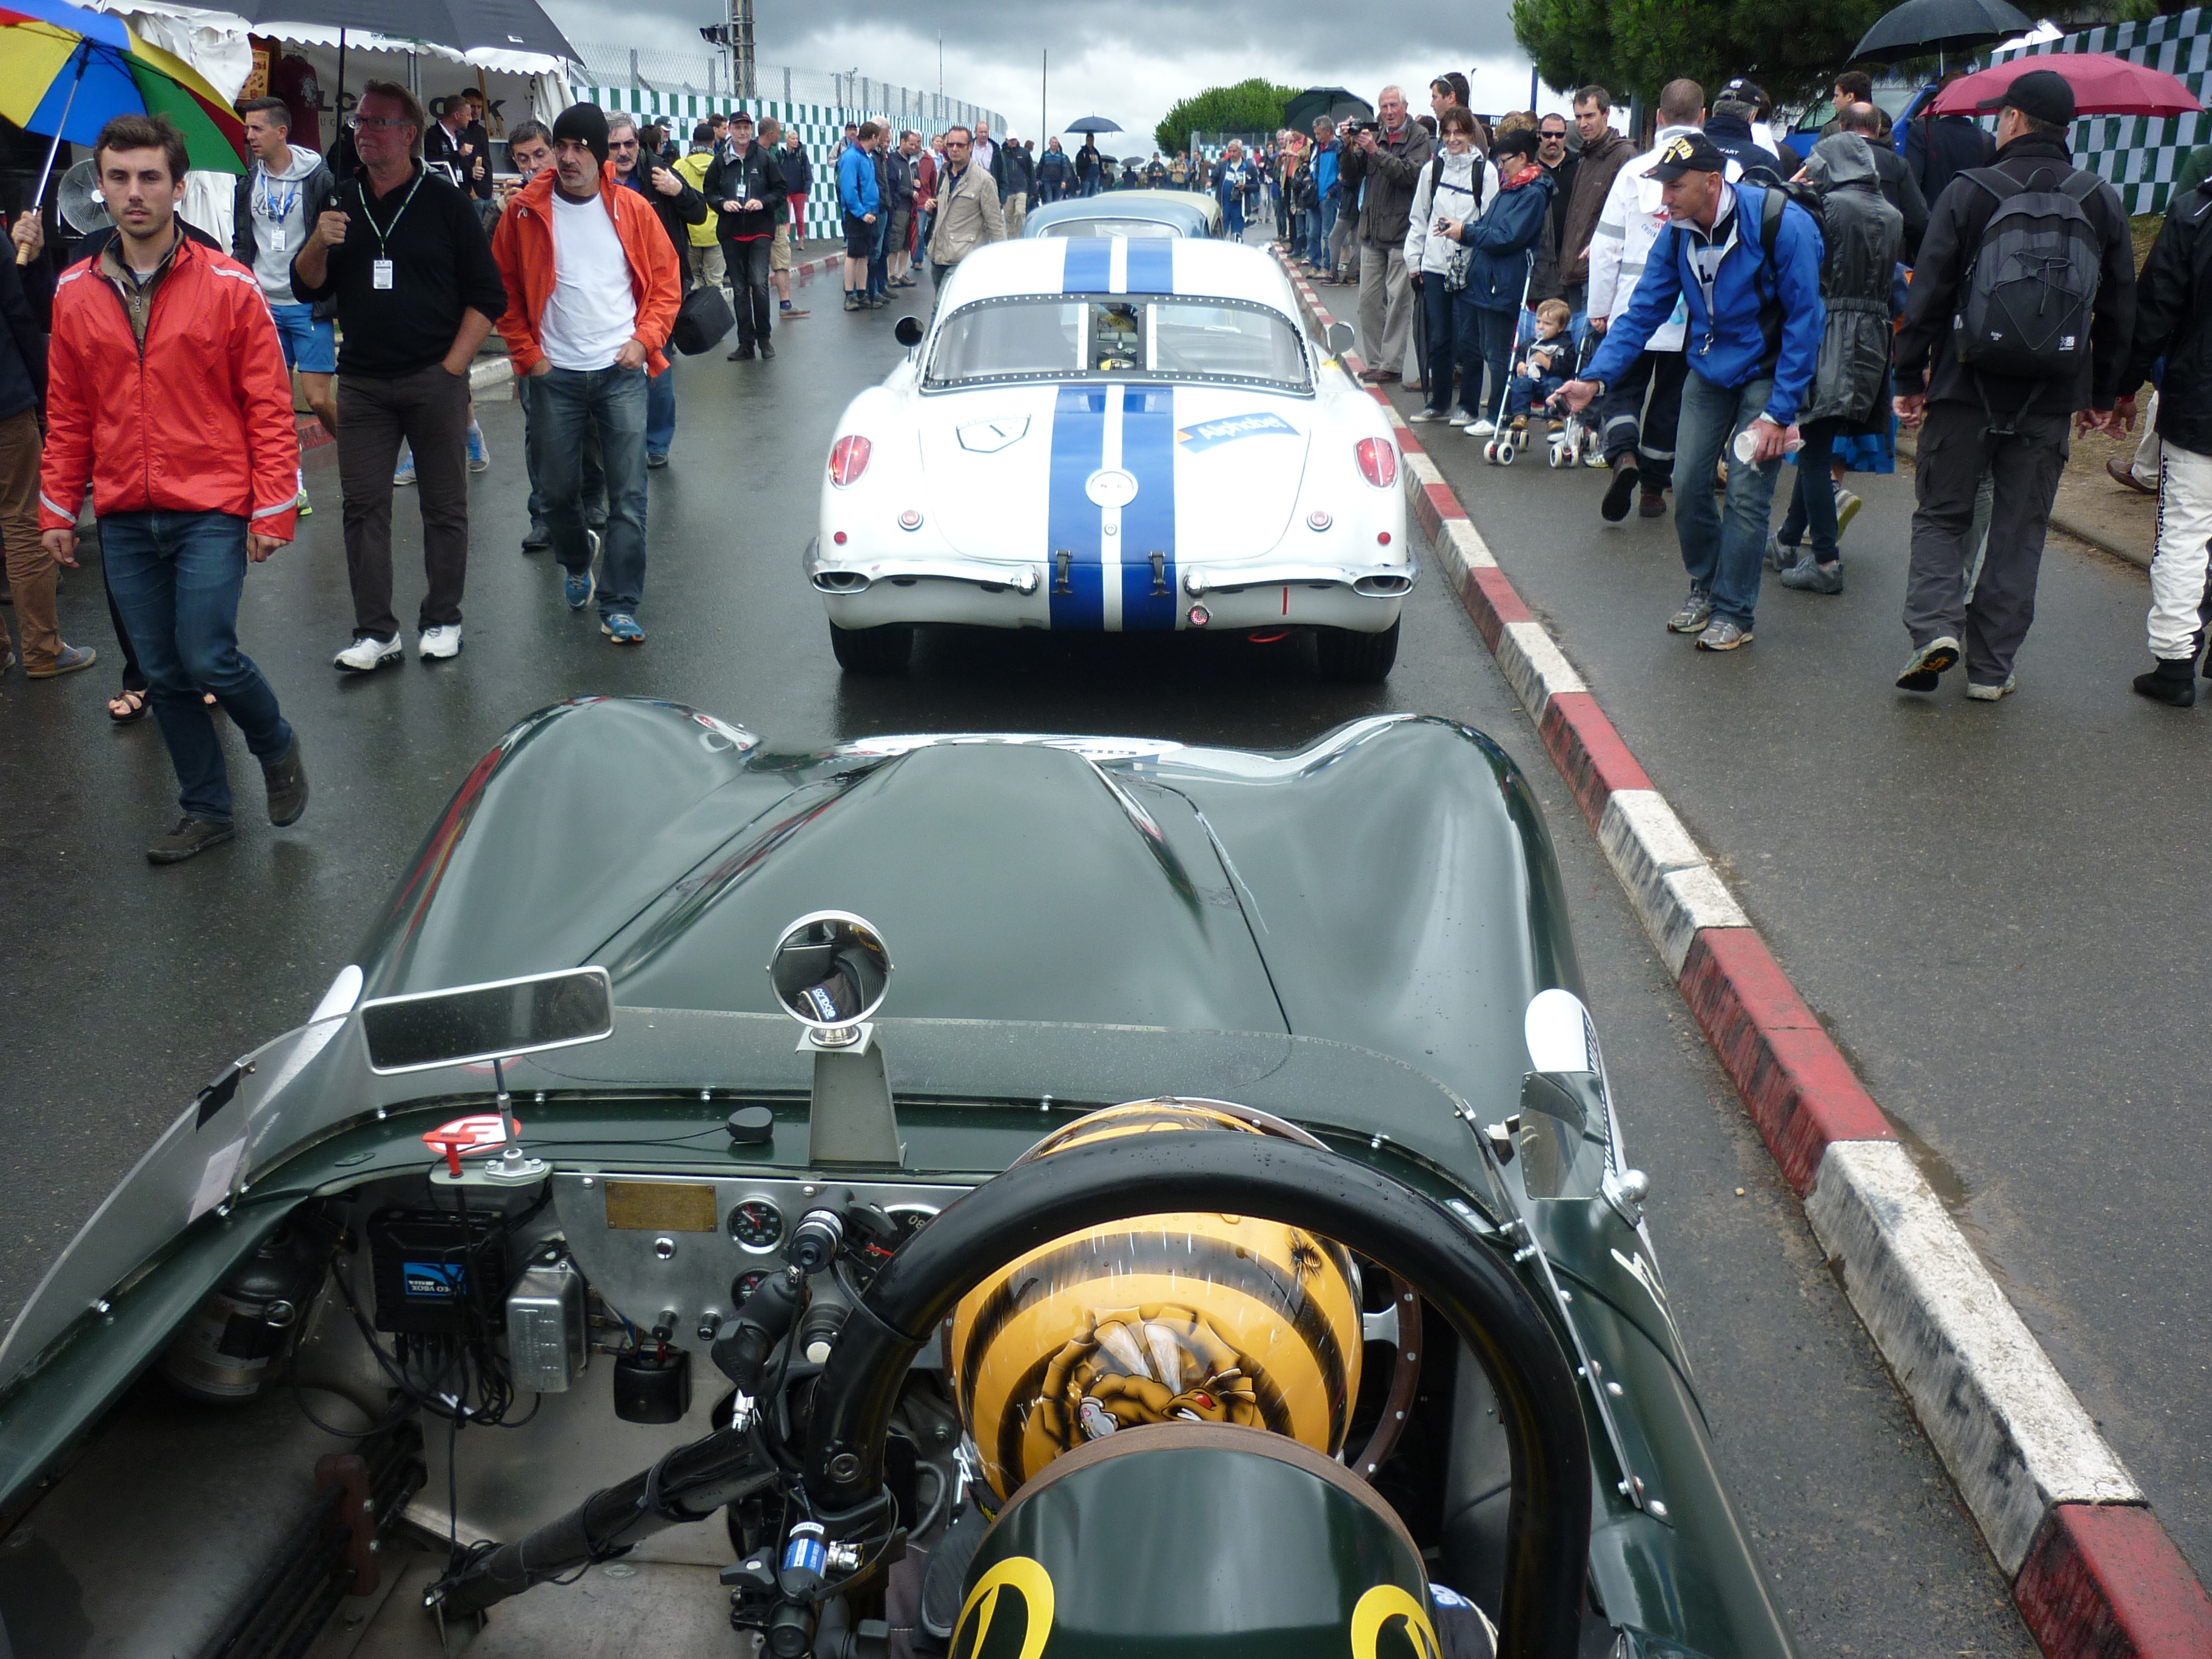 Race Cars Queuing